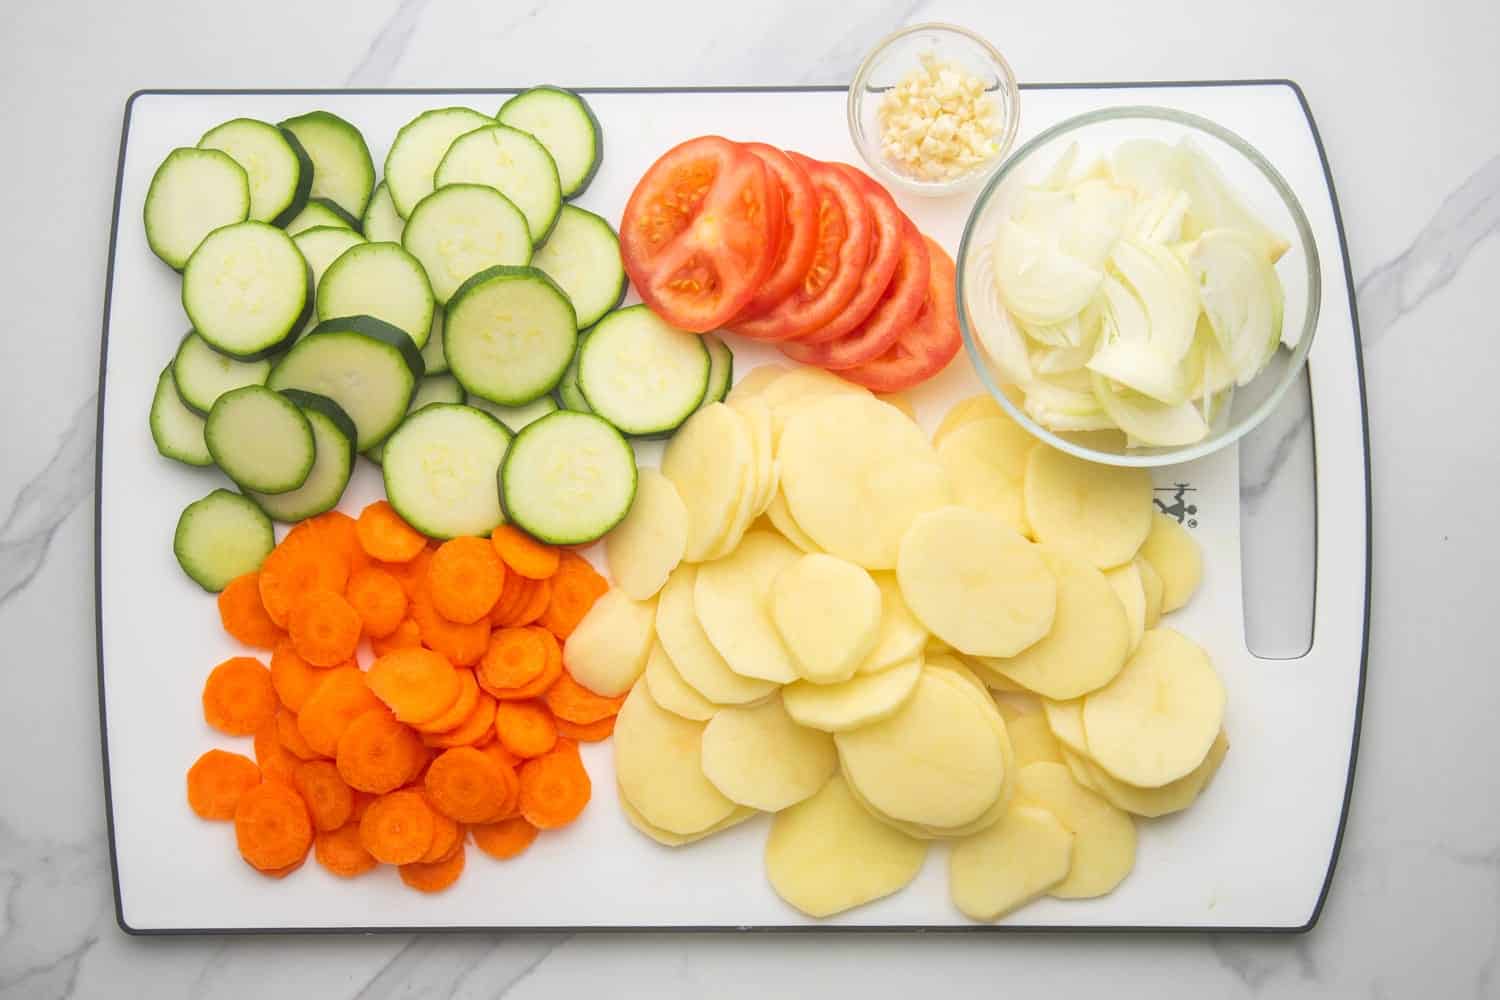 a cutting board holding thinly sliced potatoes, tomatoes, carrots, and zucchini.